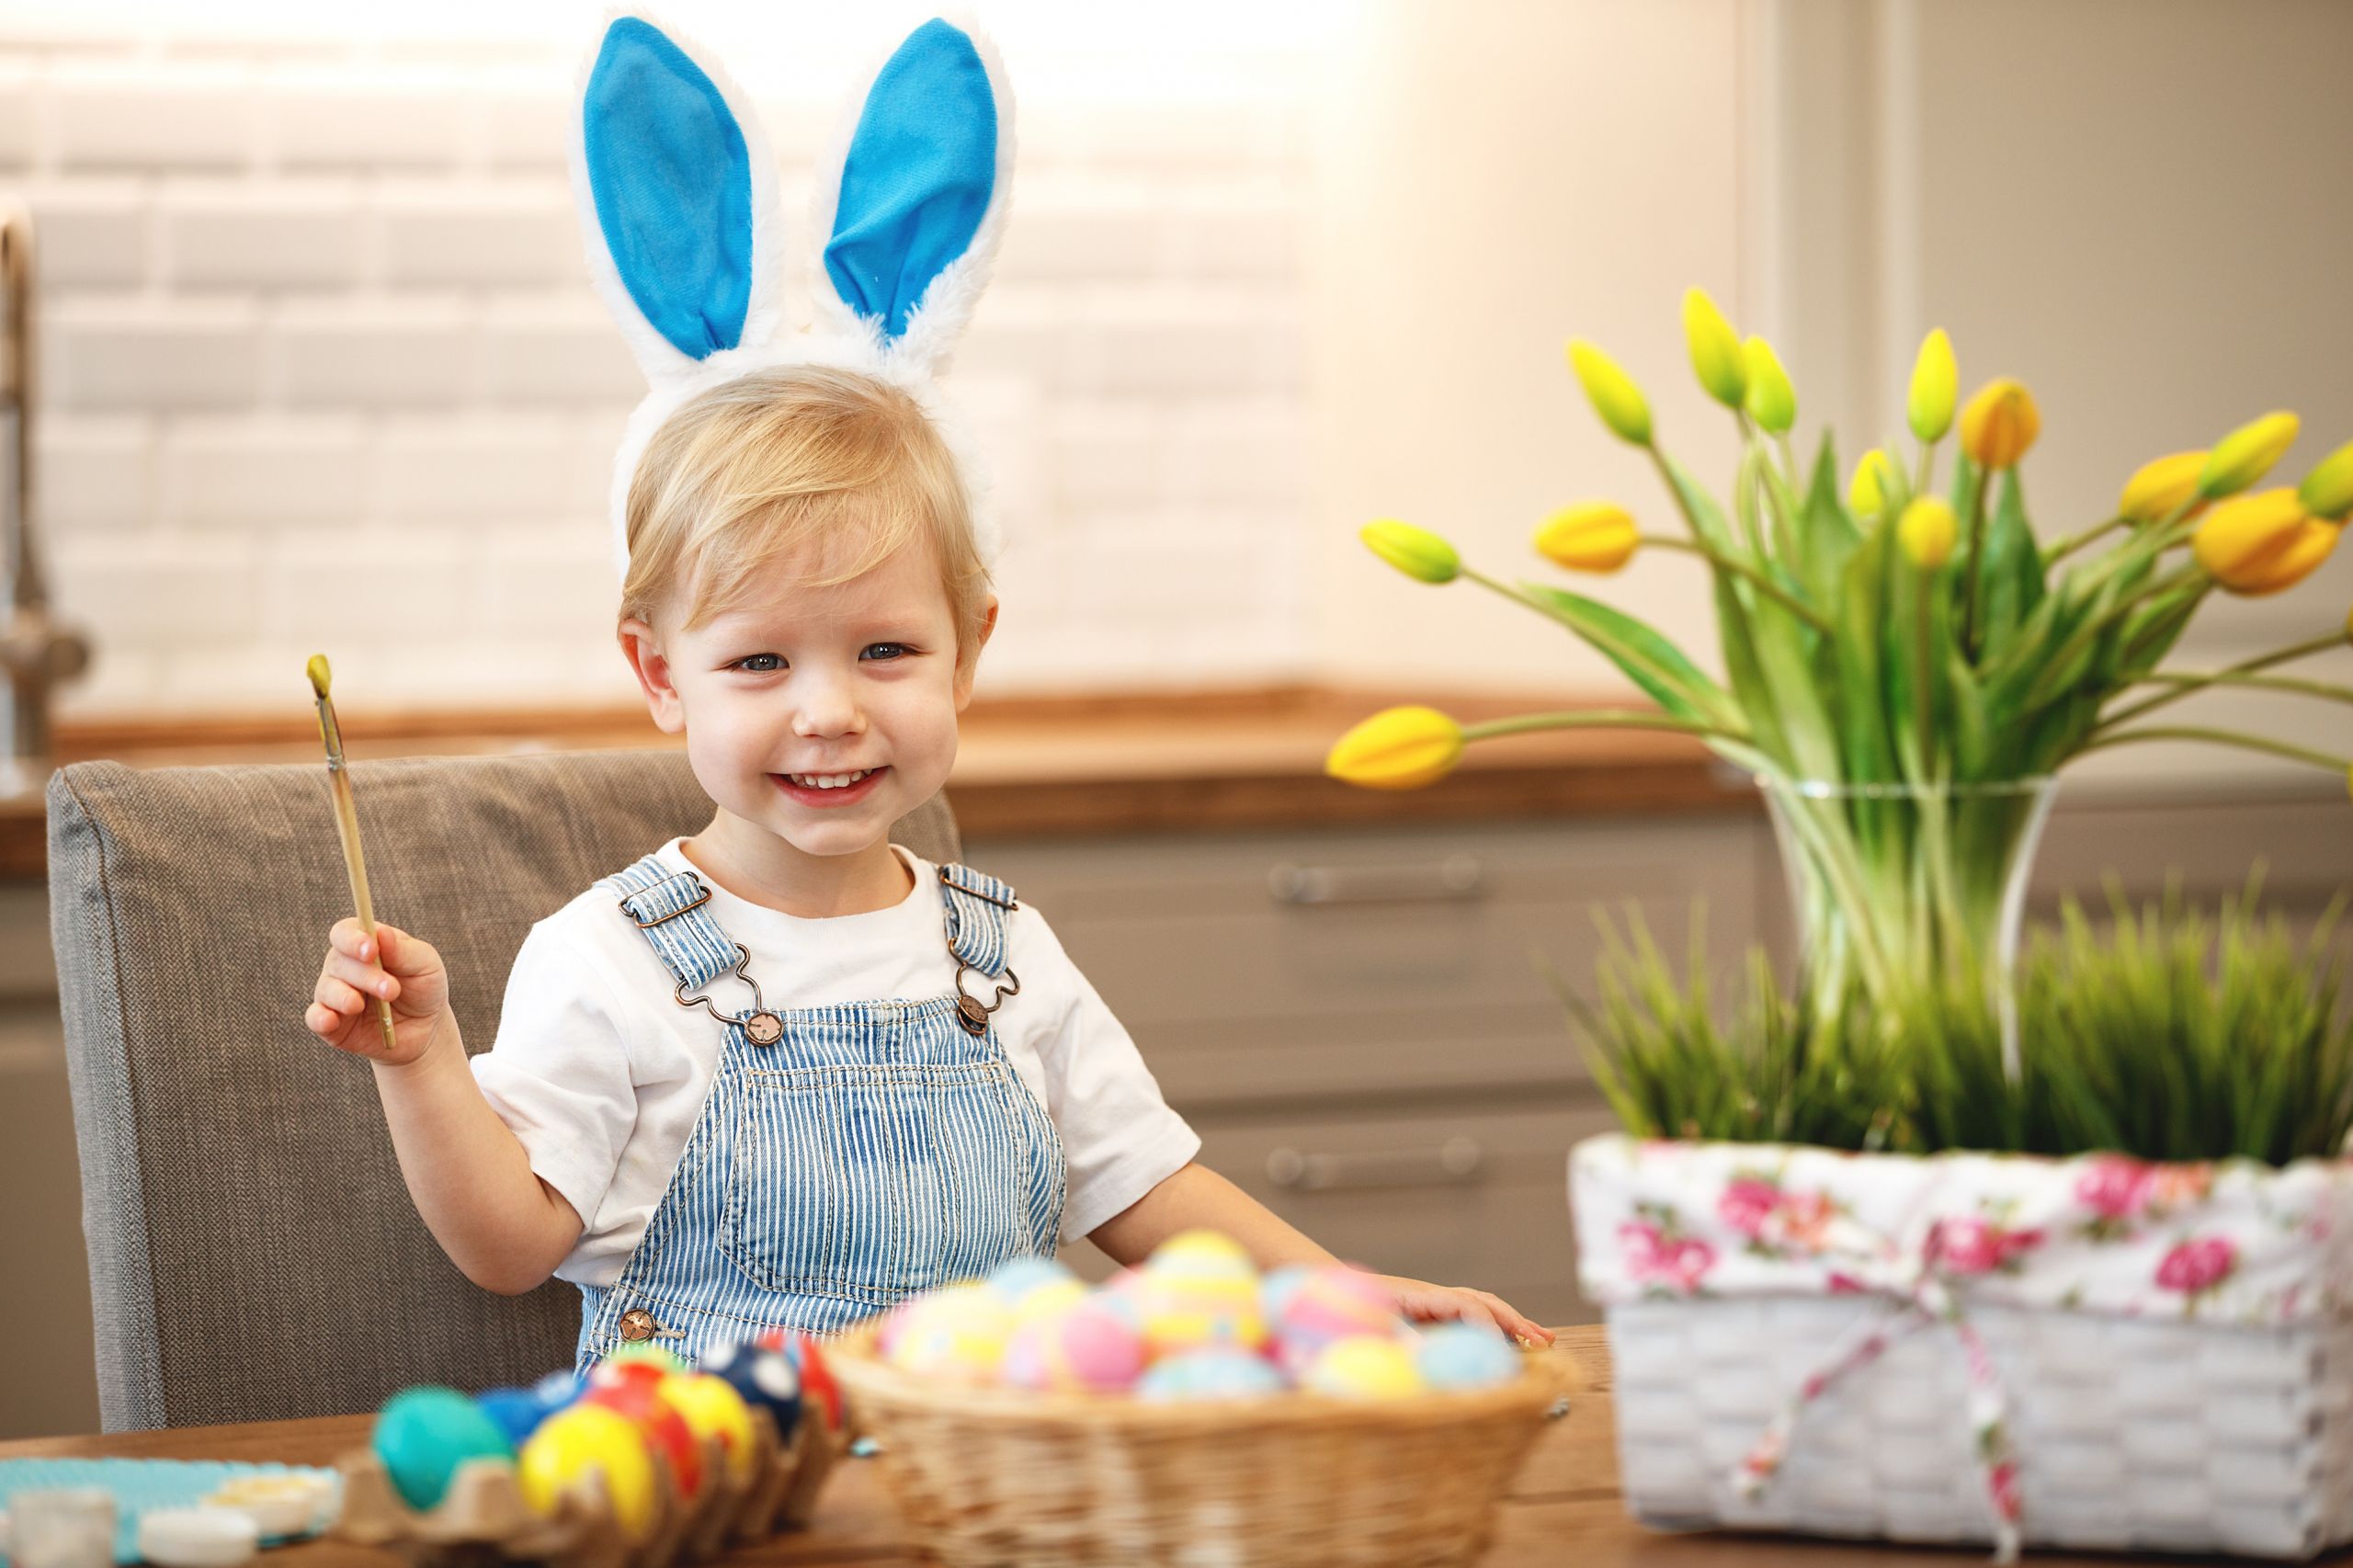 Cute Easter Ideas For Toddlers
 10 Cute Easter Crafts for Kids FamilyEducation